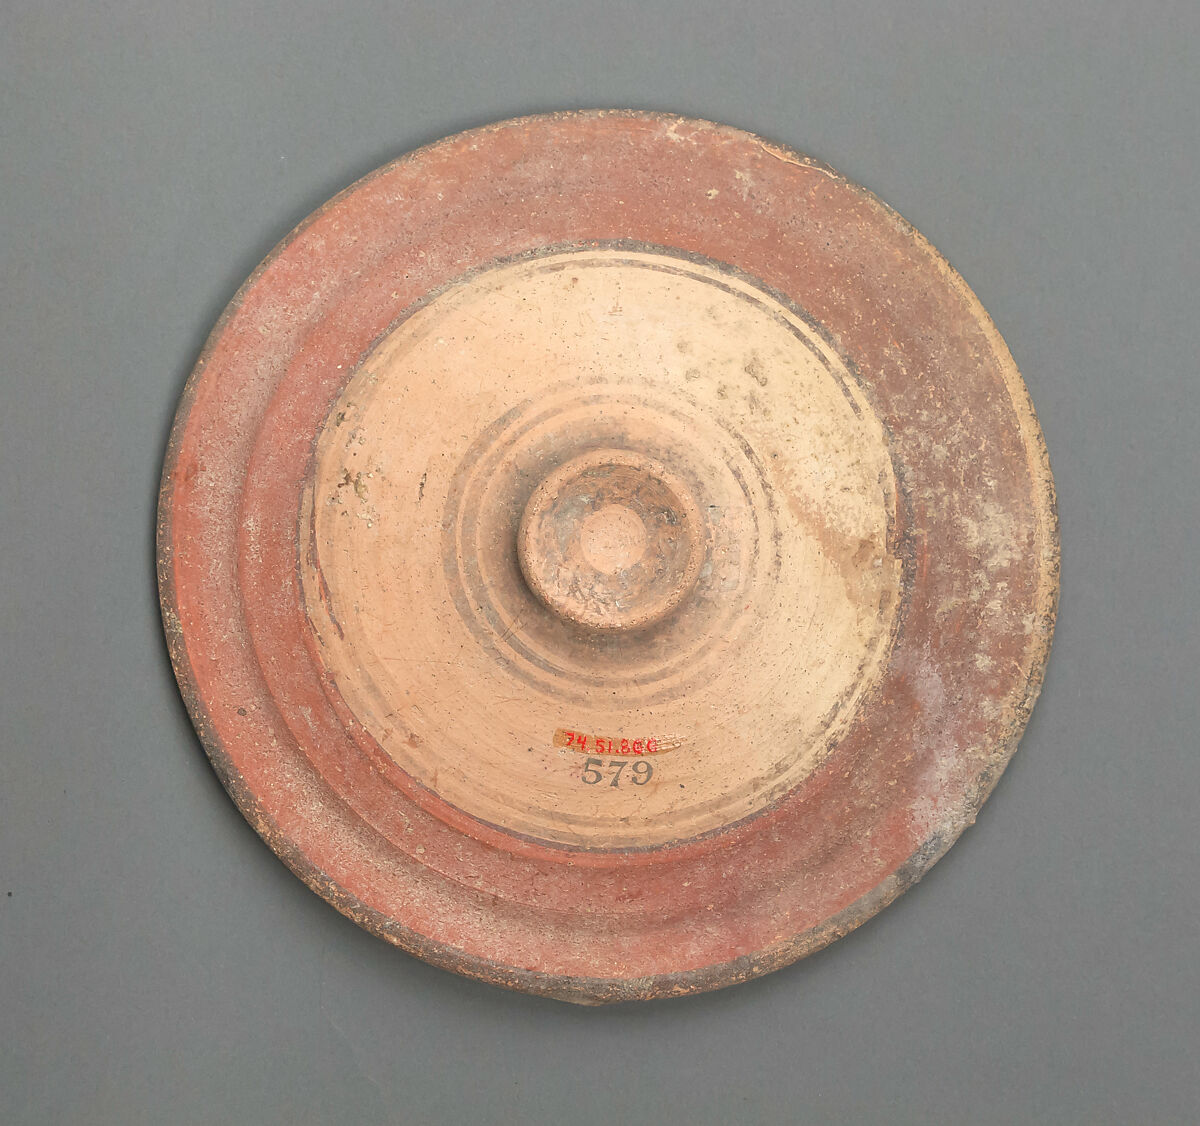 Lid of a bowl, Terracotta, Cypriot 